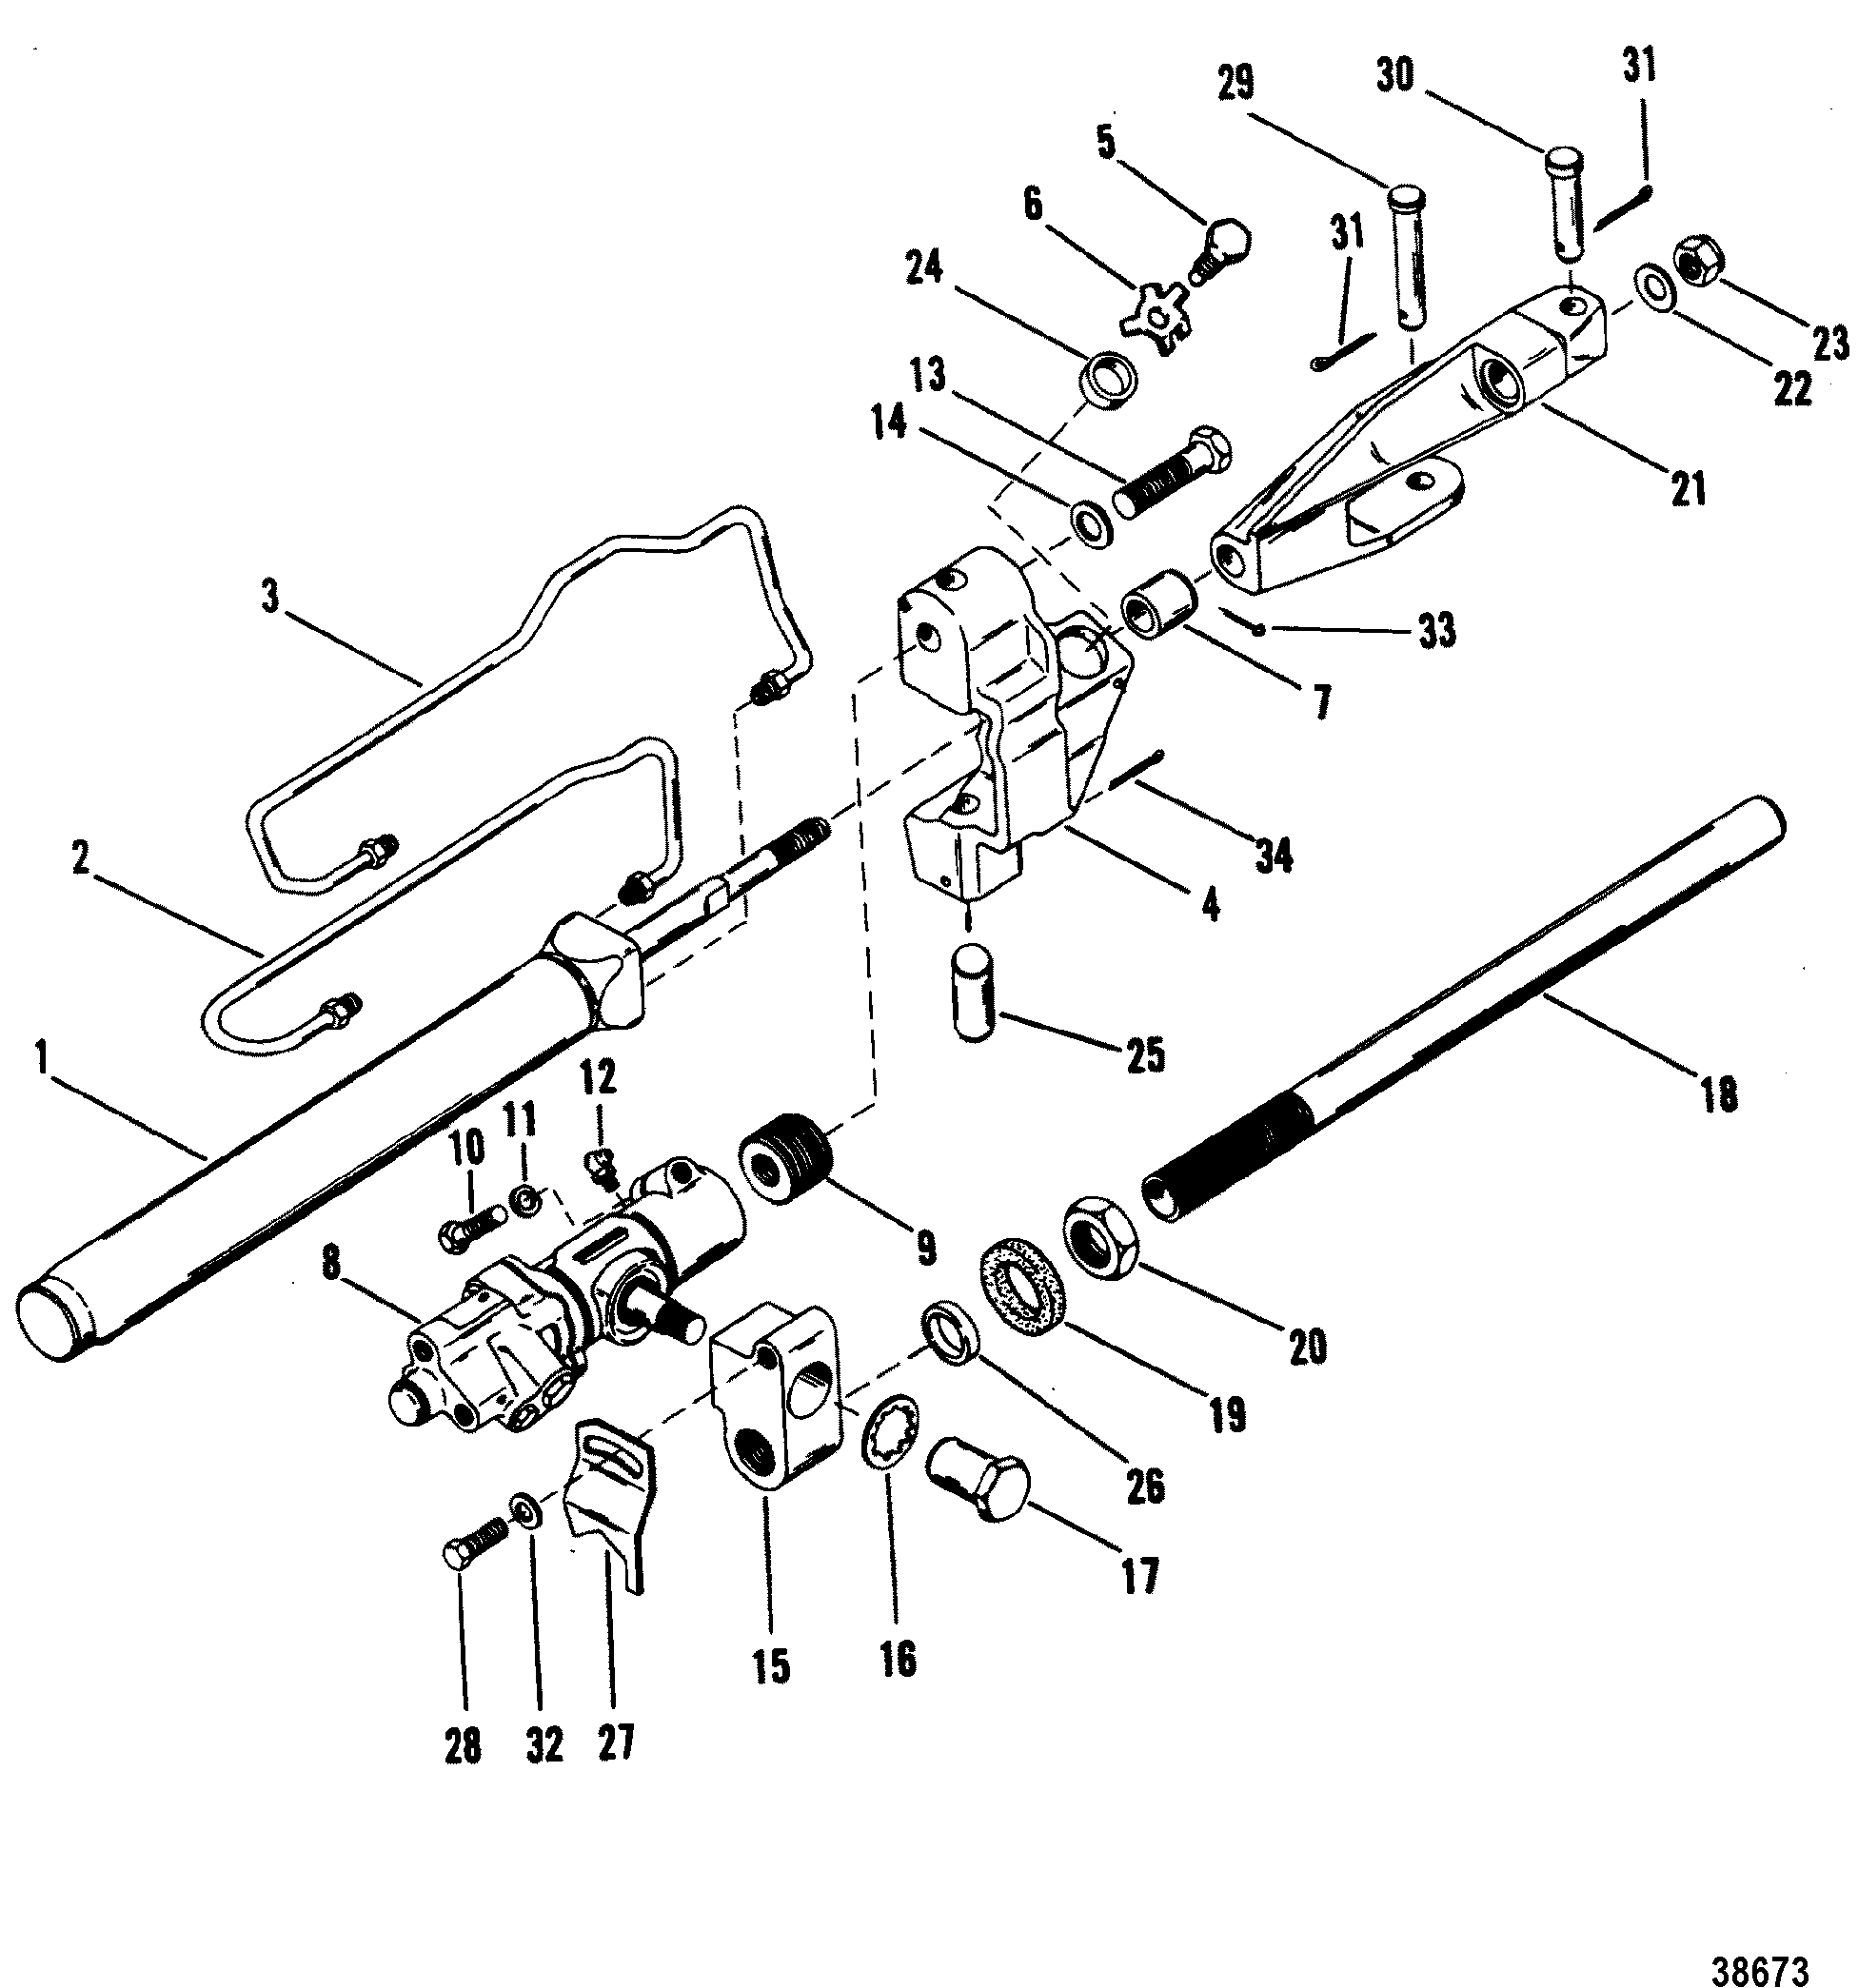 POWER STEERING COMPONENTS(OLD DESIGN)